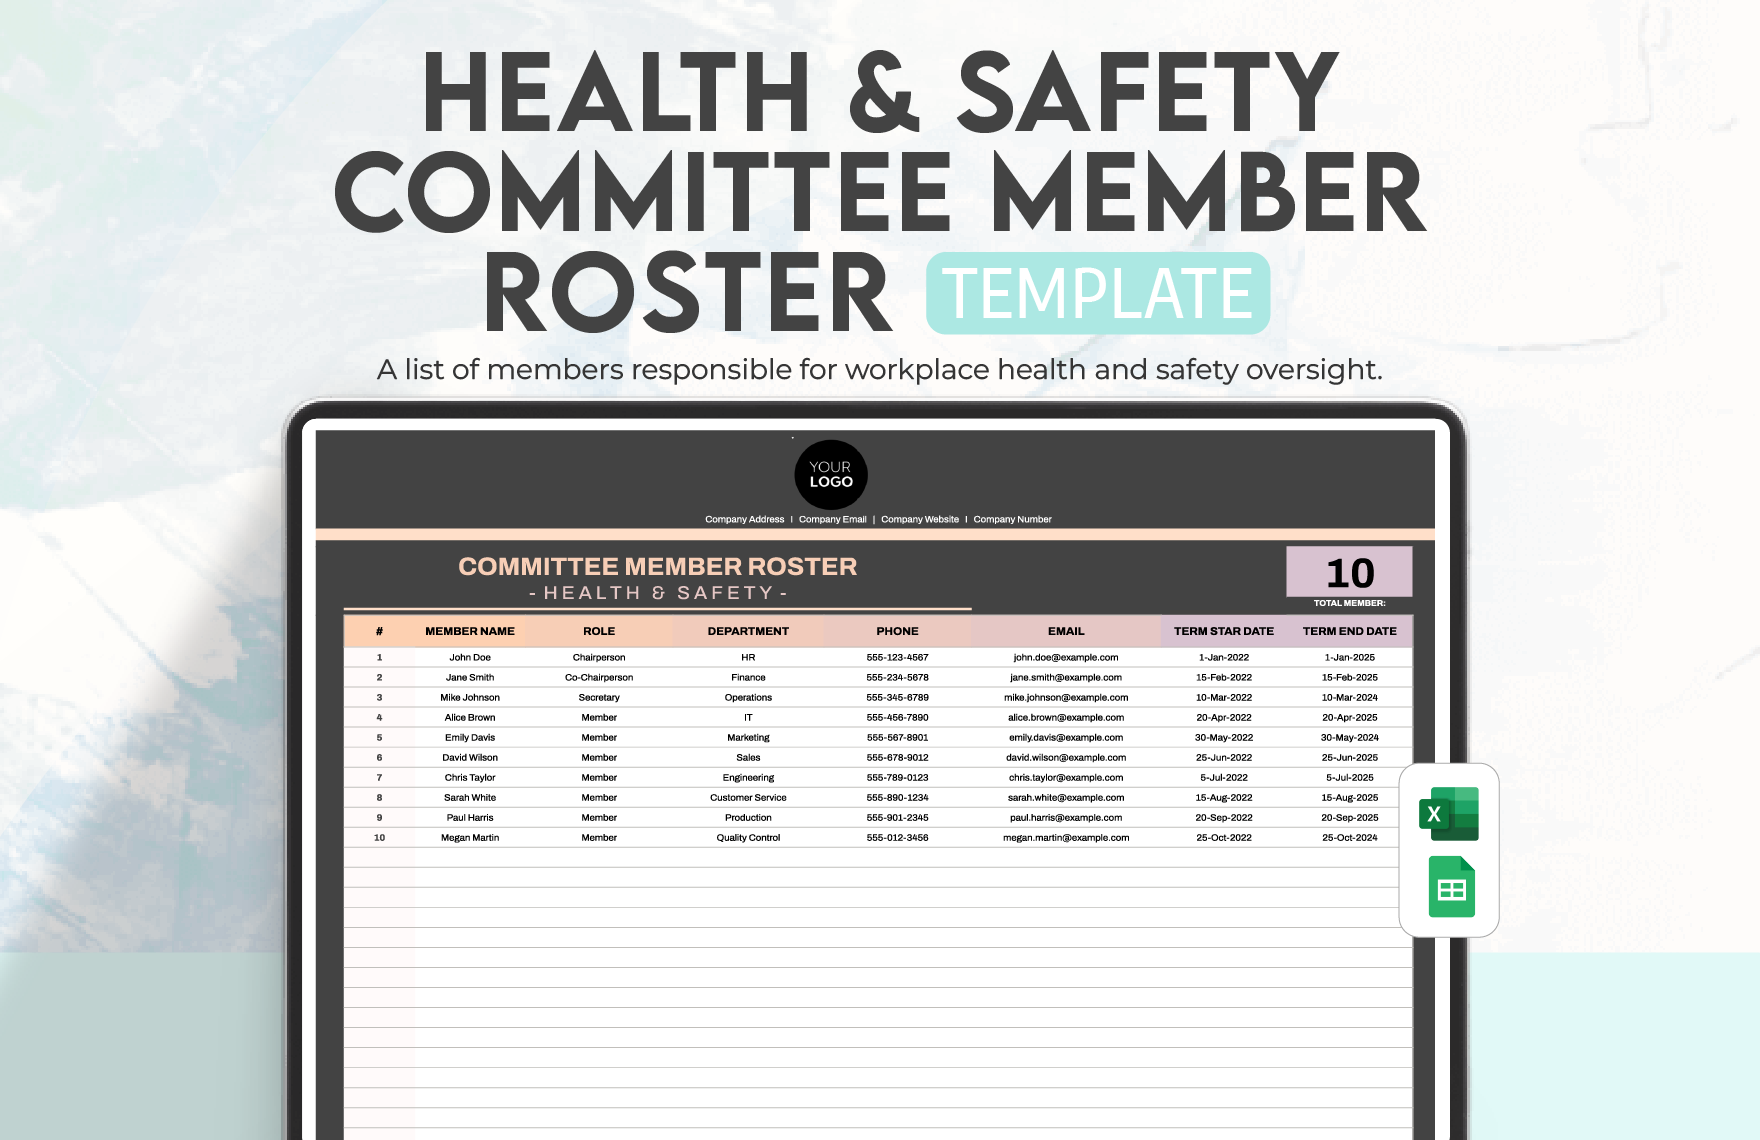 Health & Safety Committee Member Roster Template in Excel, Google Sheets